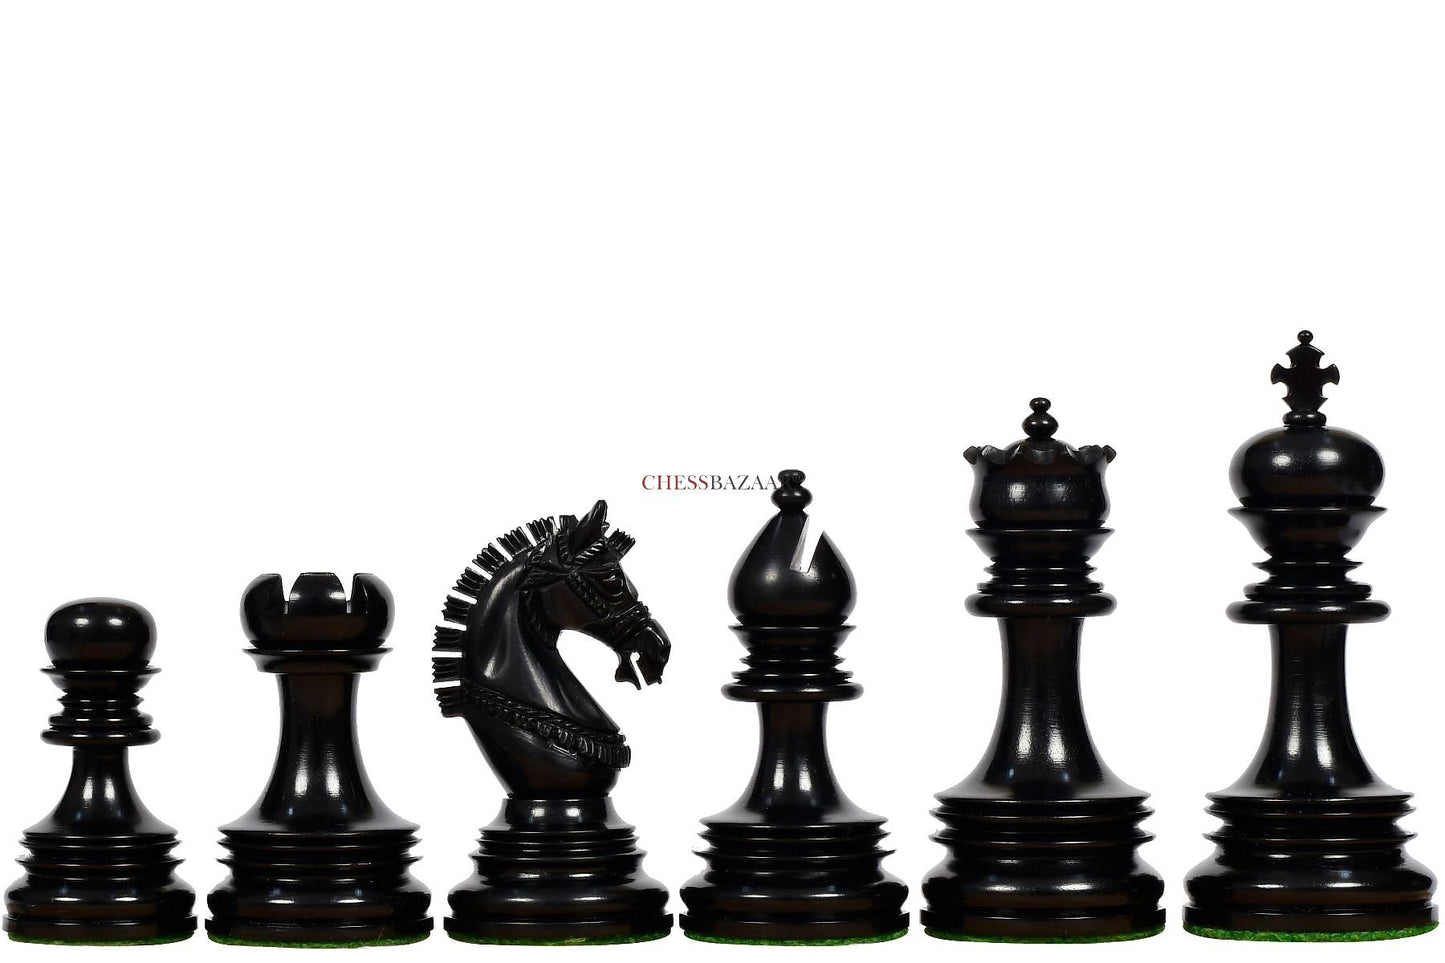 The Indian Chetak II Customized Lead Weighted Staunton Wood Chess Pieces in Ebony Wood / Box Wood - 4.3" King extra Queens